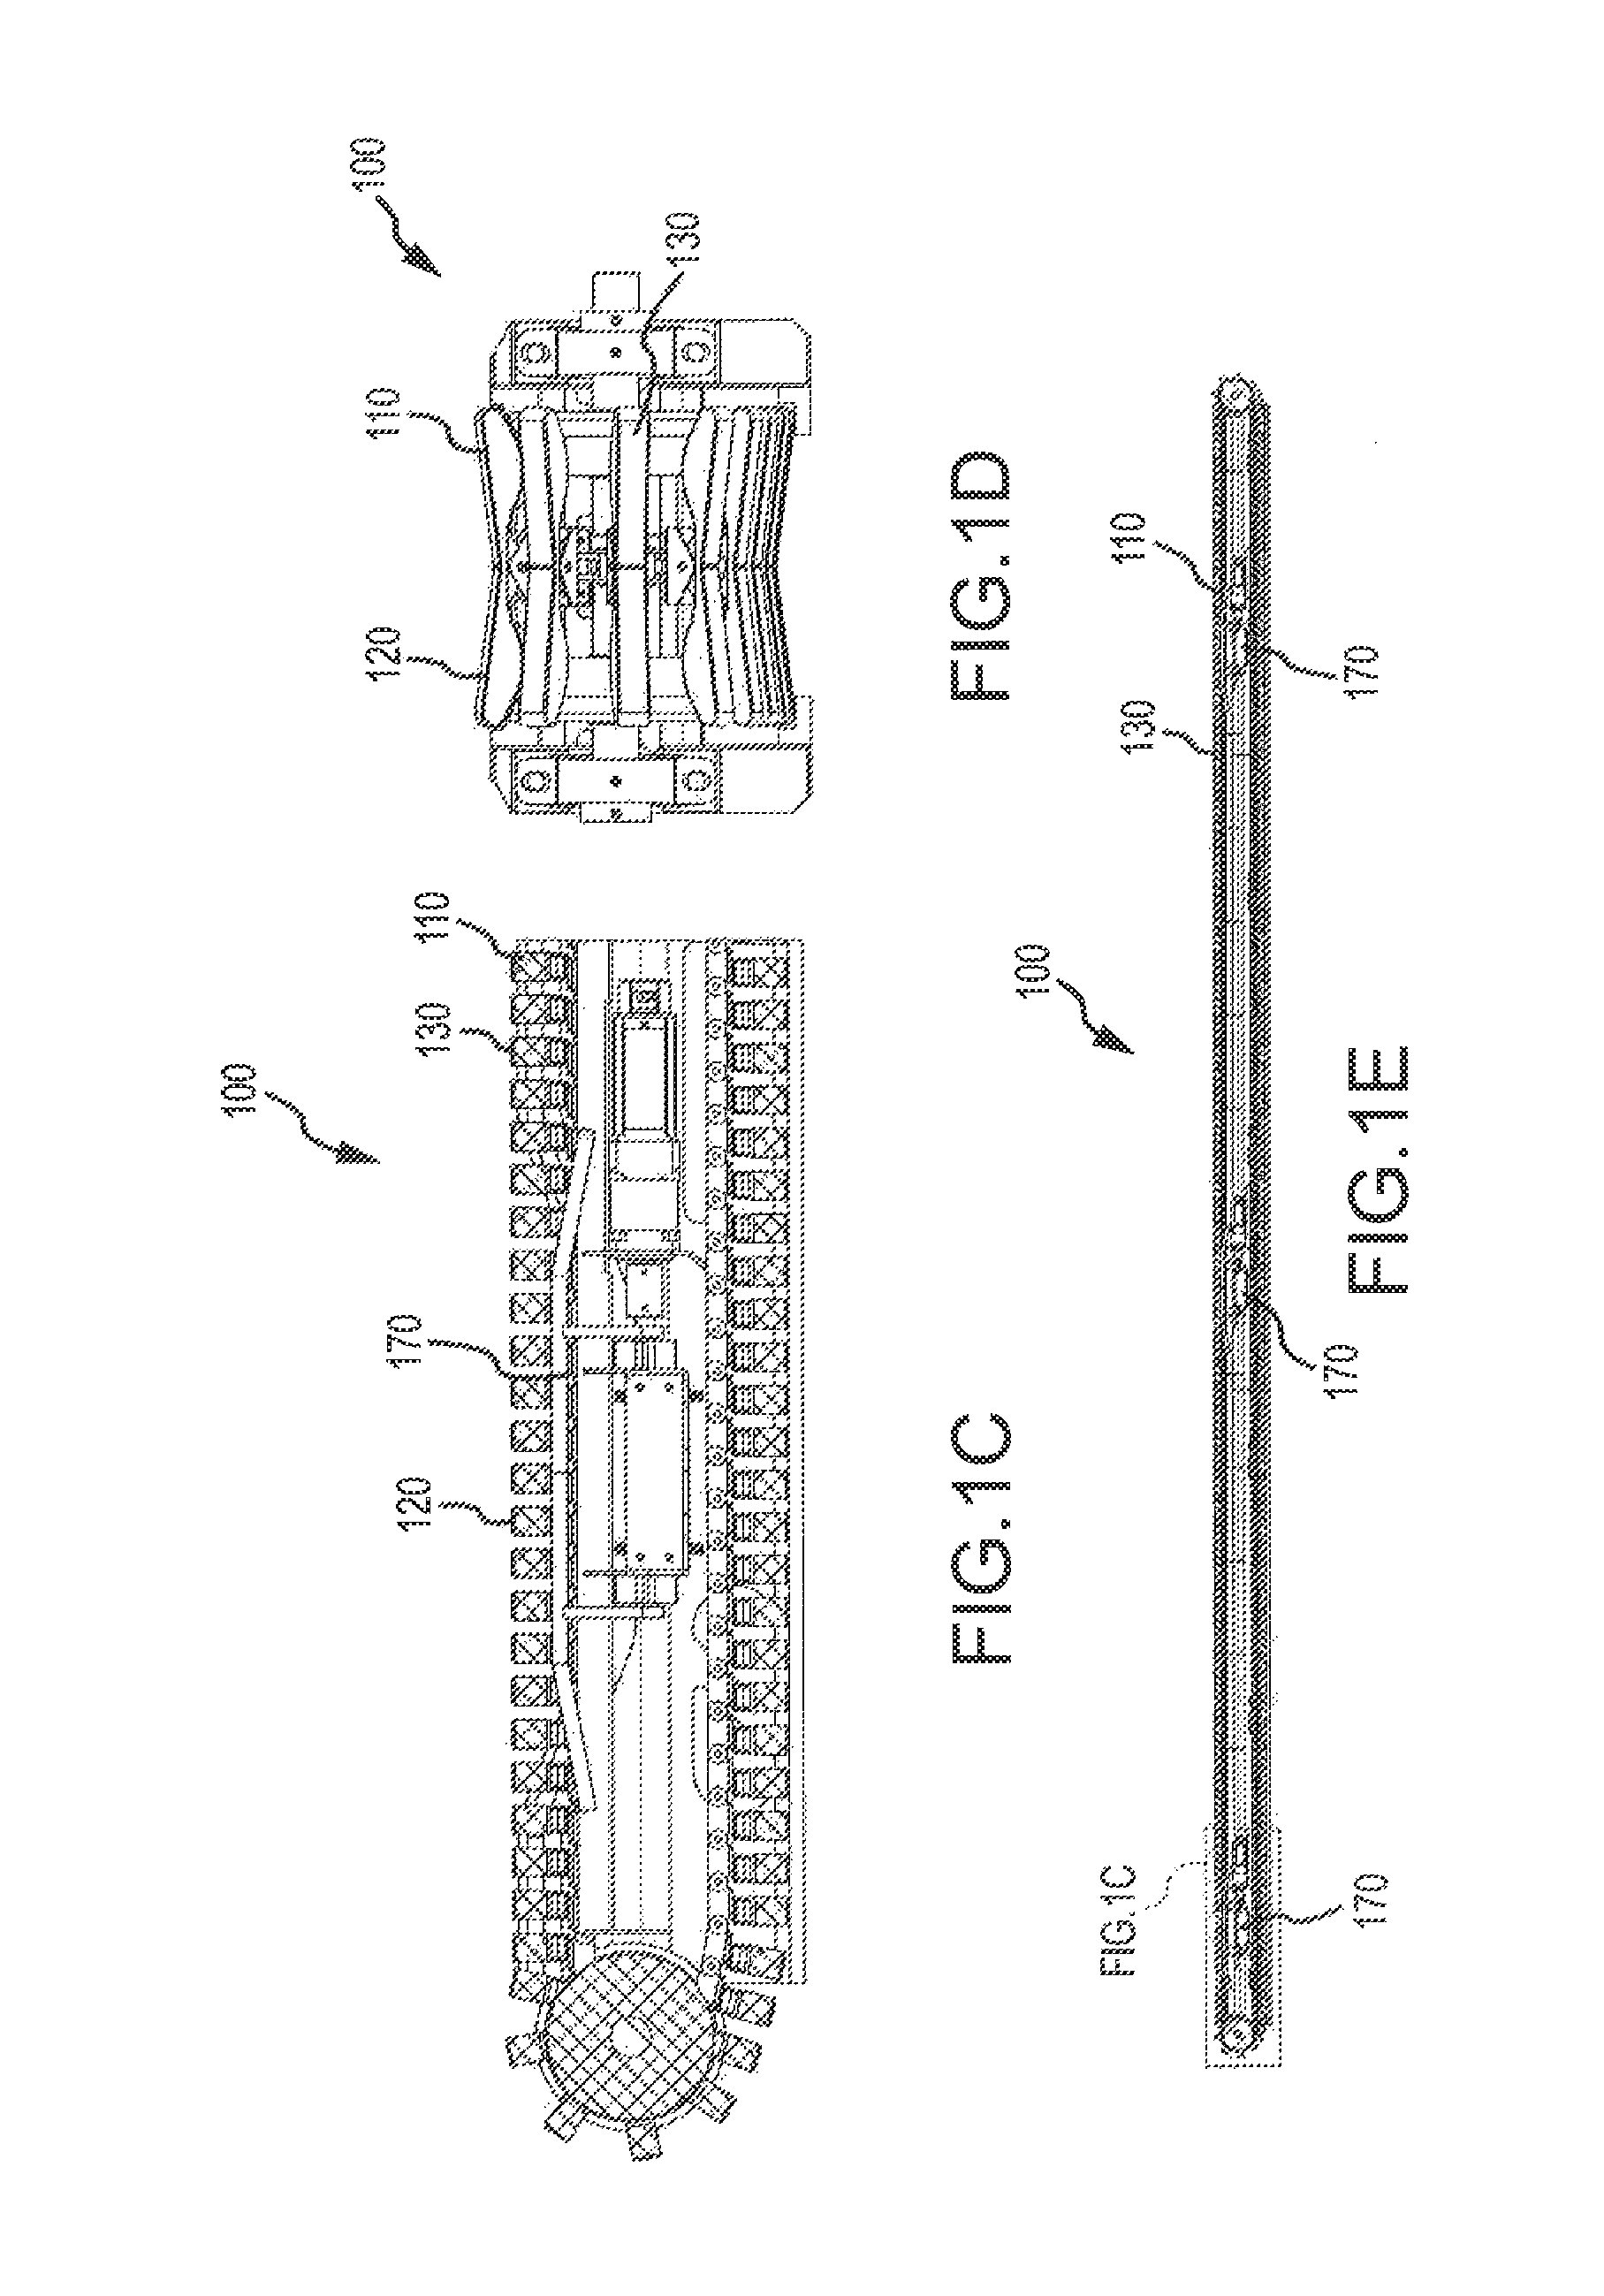 Weighing and sorting system and method